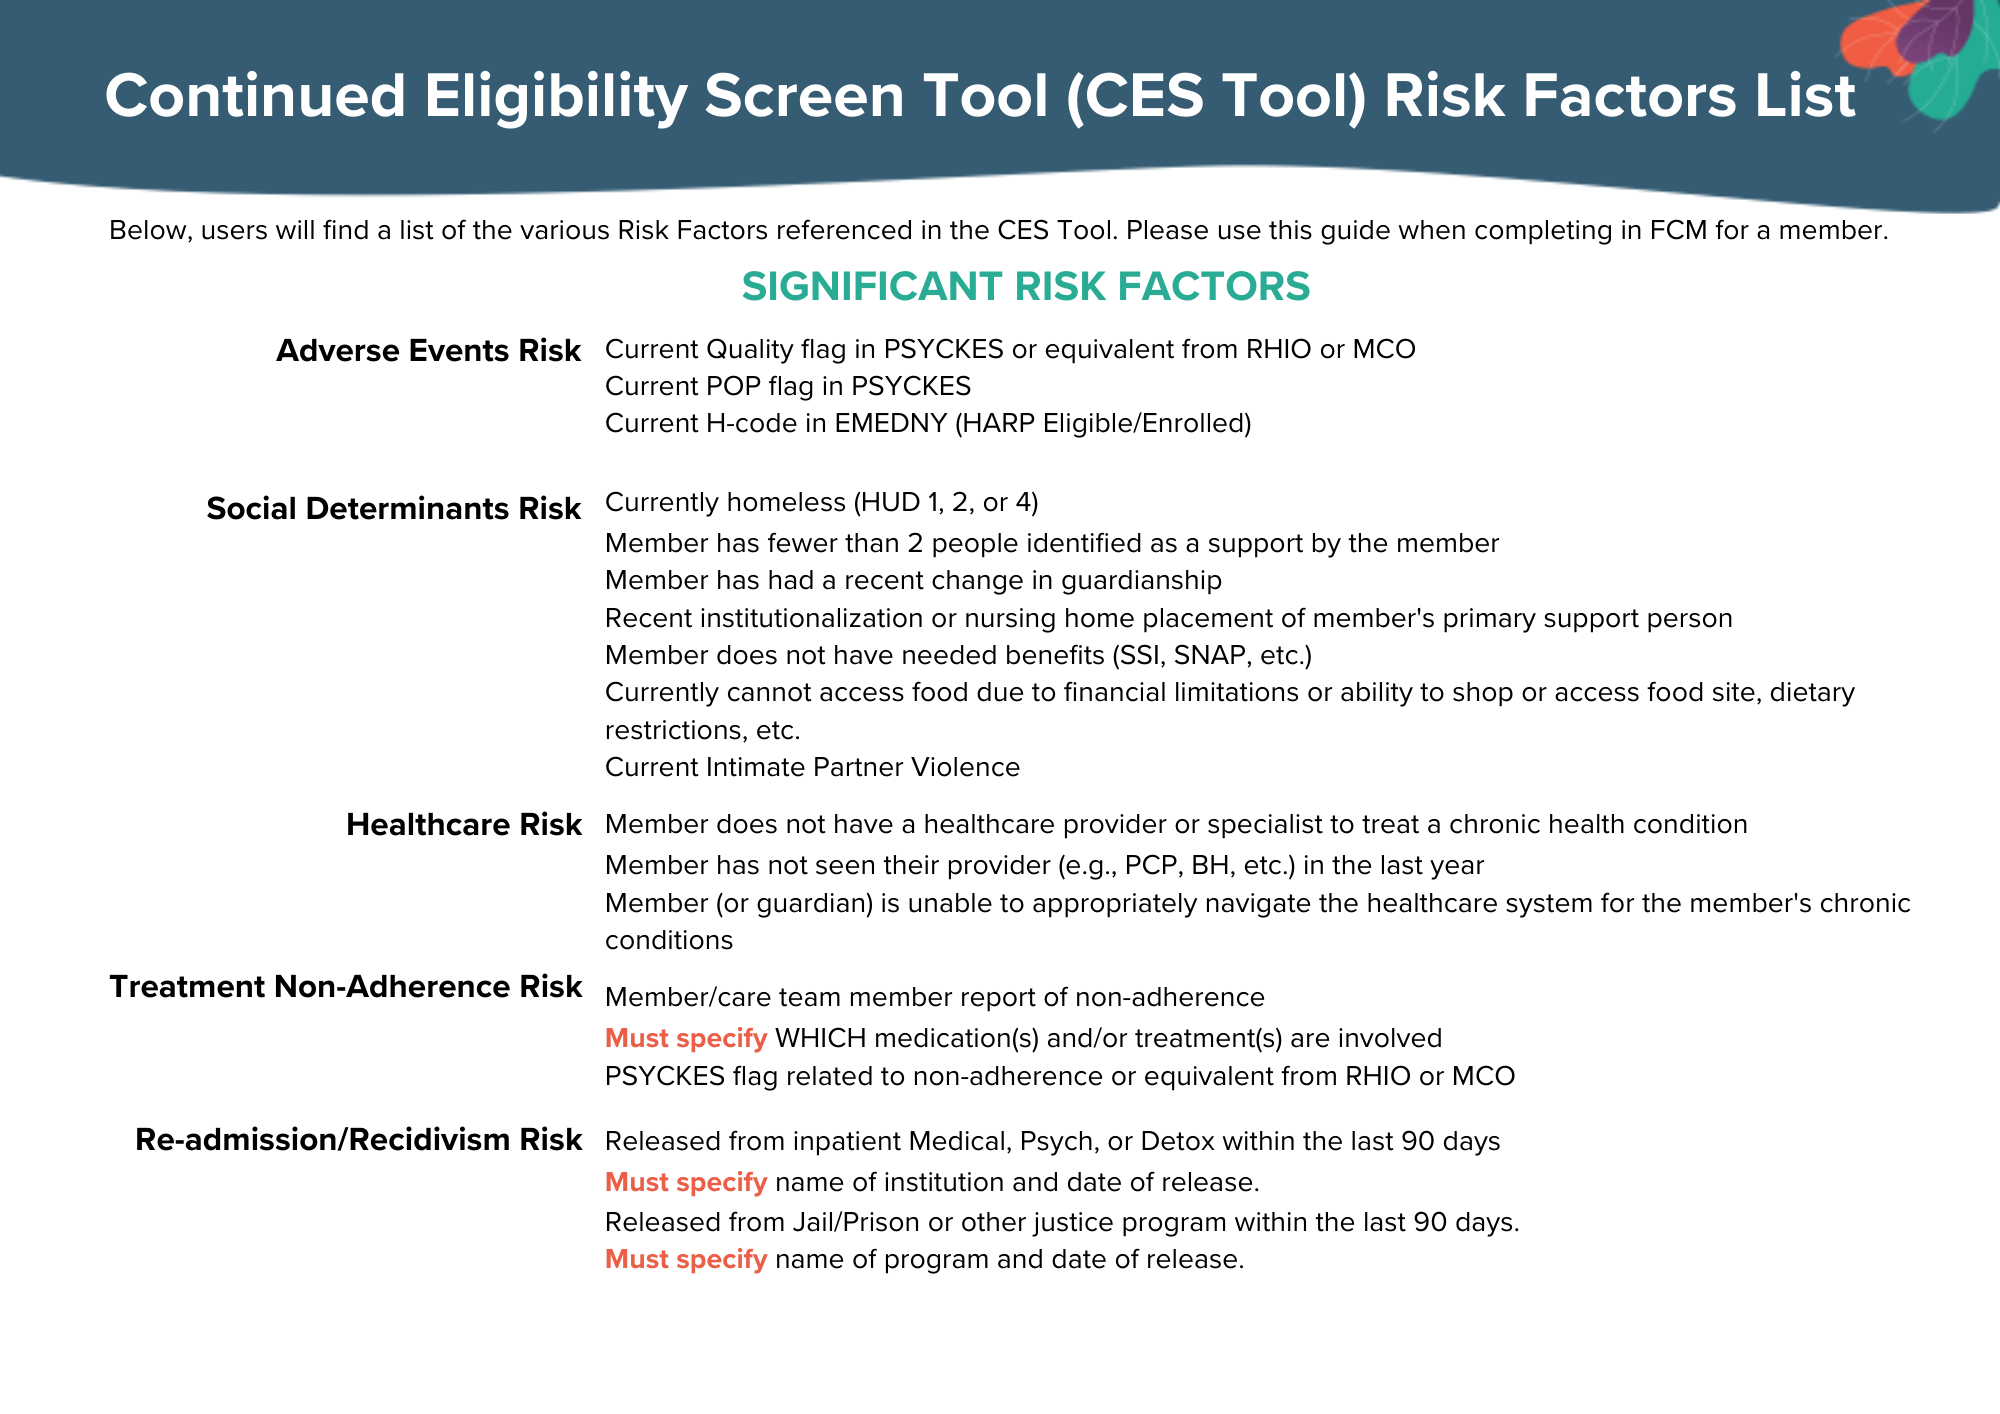 Significant Risk Factor pg 1.png